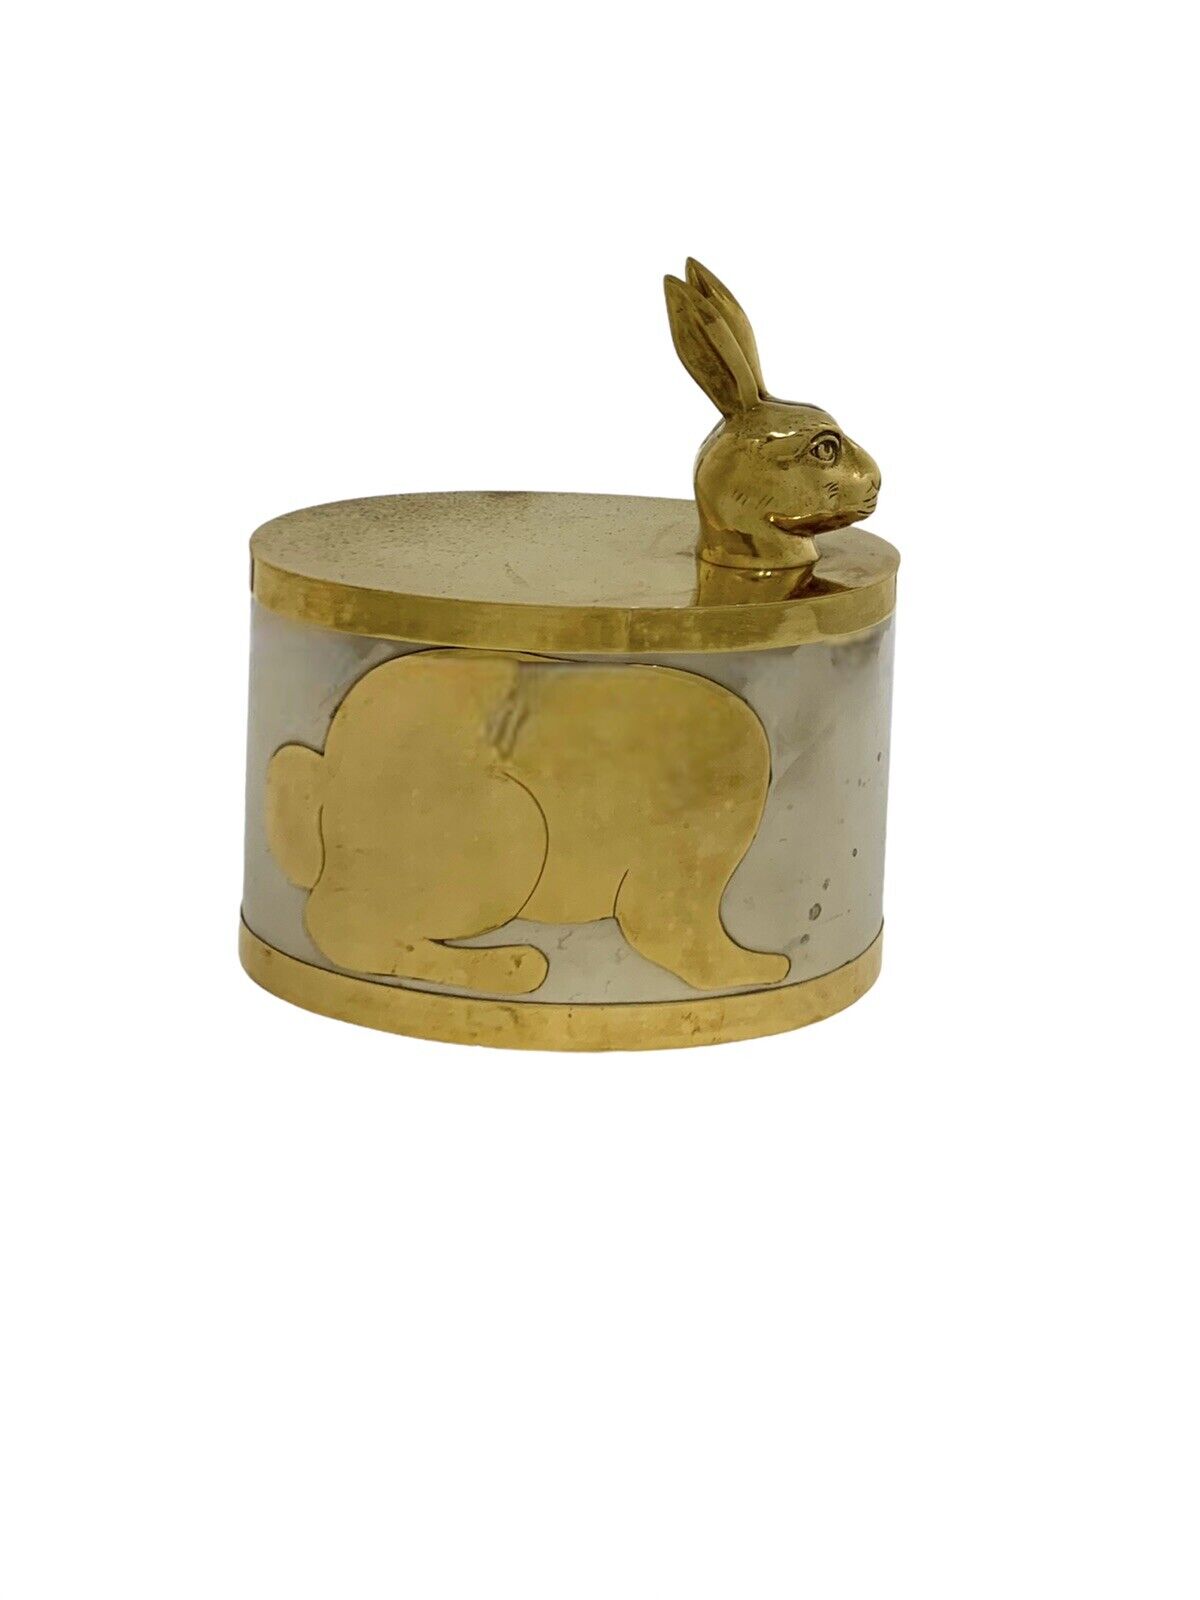 Rabbit Design Container Metal / Brass Made in Italy Vintage Collectibles Decor